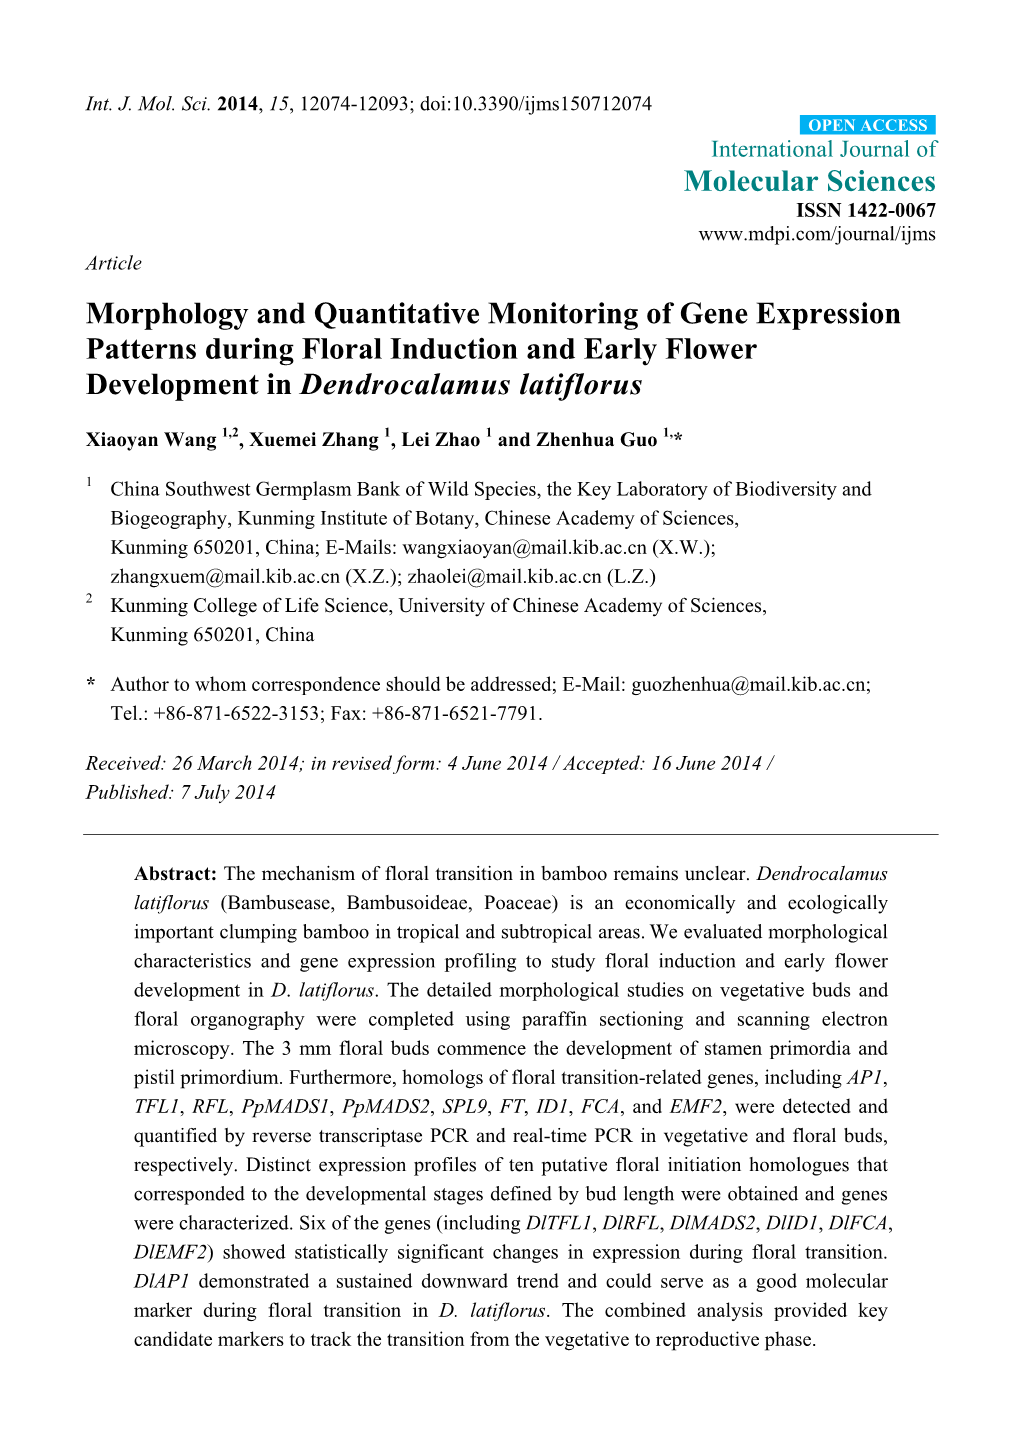 Morphology and Quantitative Monitoring of Gene Expression Patterns During Floral Induction and Early Flower Development in Dendrocalamus Latiflorus